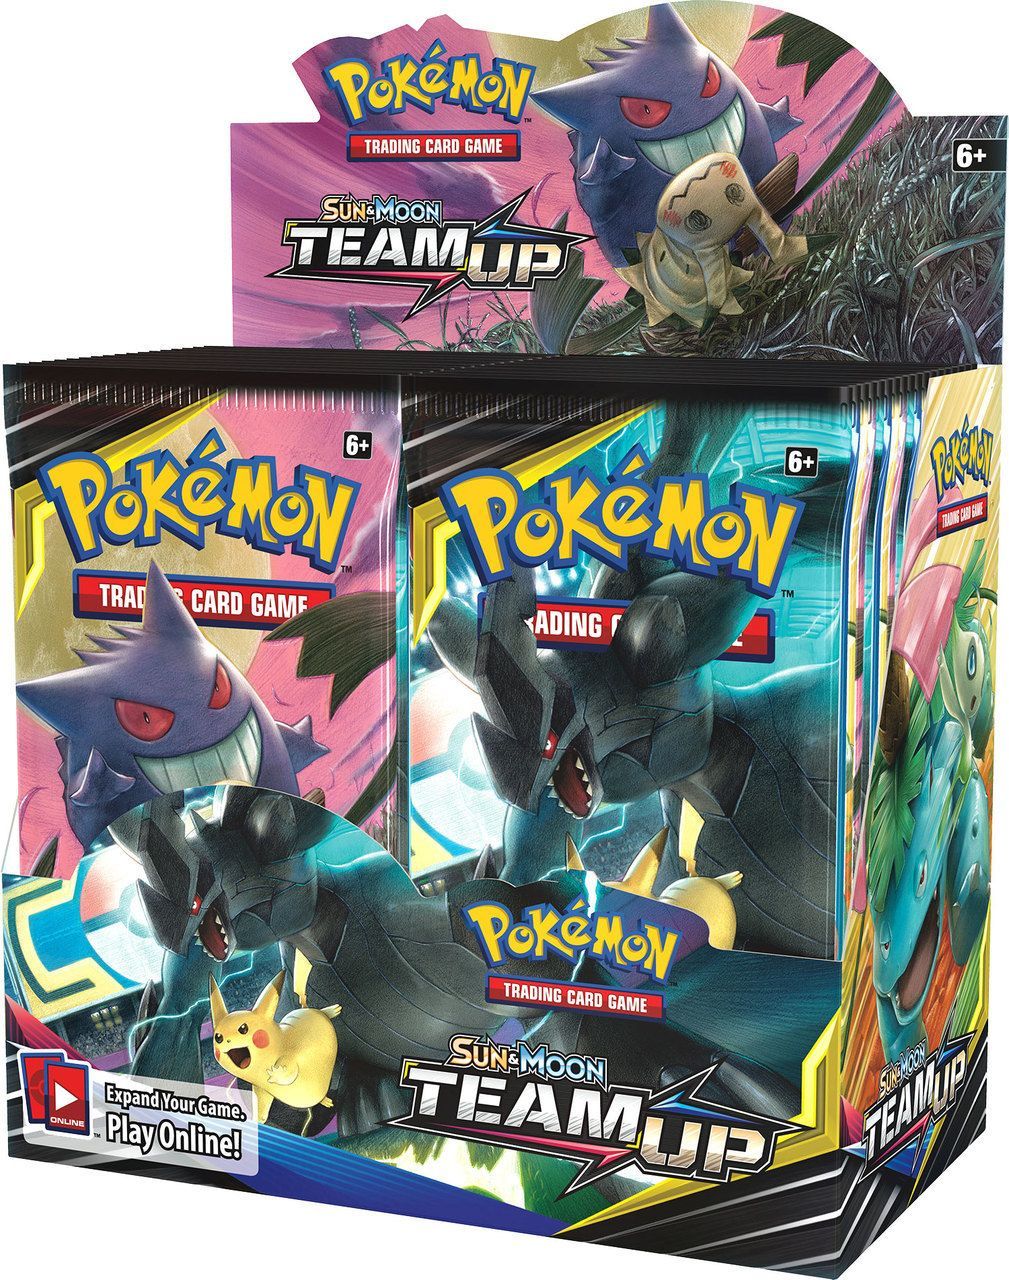 Team Up Booster Box